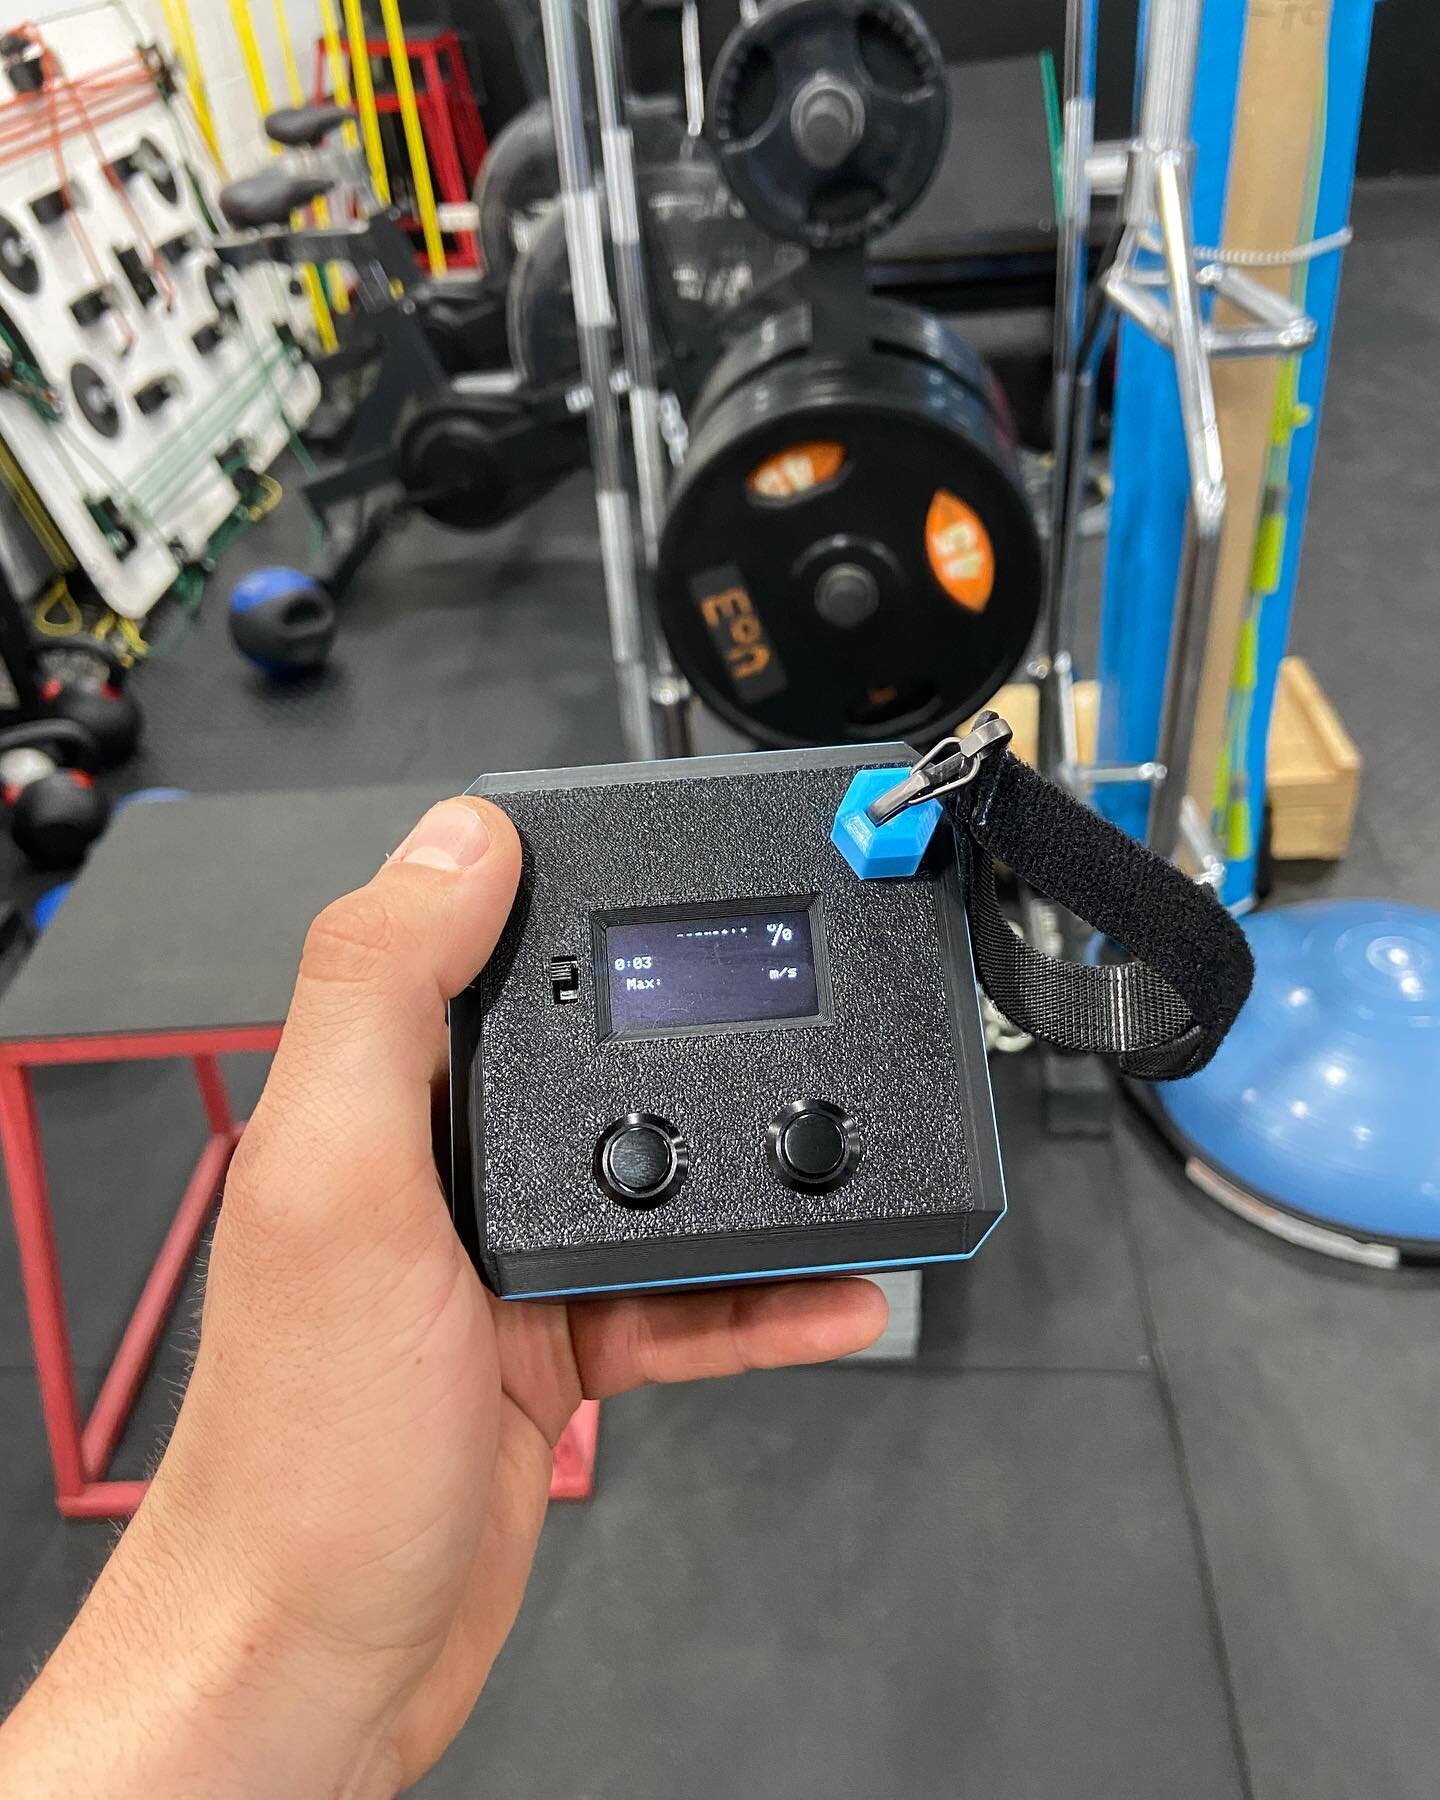 New velocity based trainer, @gravitybox at The Lab 📊

This tool allows us to measure power and velocity during lifts. We are starting to use this tool for;

📝 Baseline testing
📈 Determining weights during lifts 
😴 Tracking fatigue during lifts to